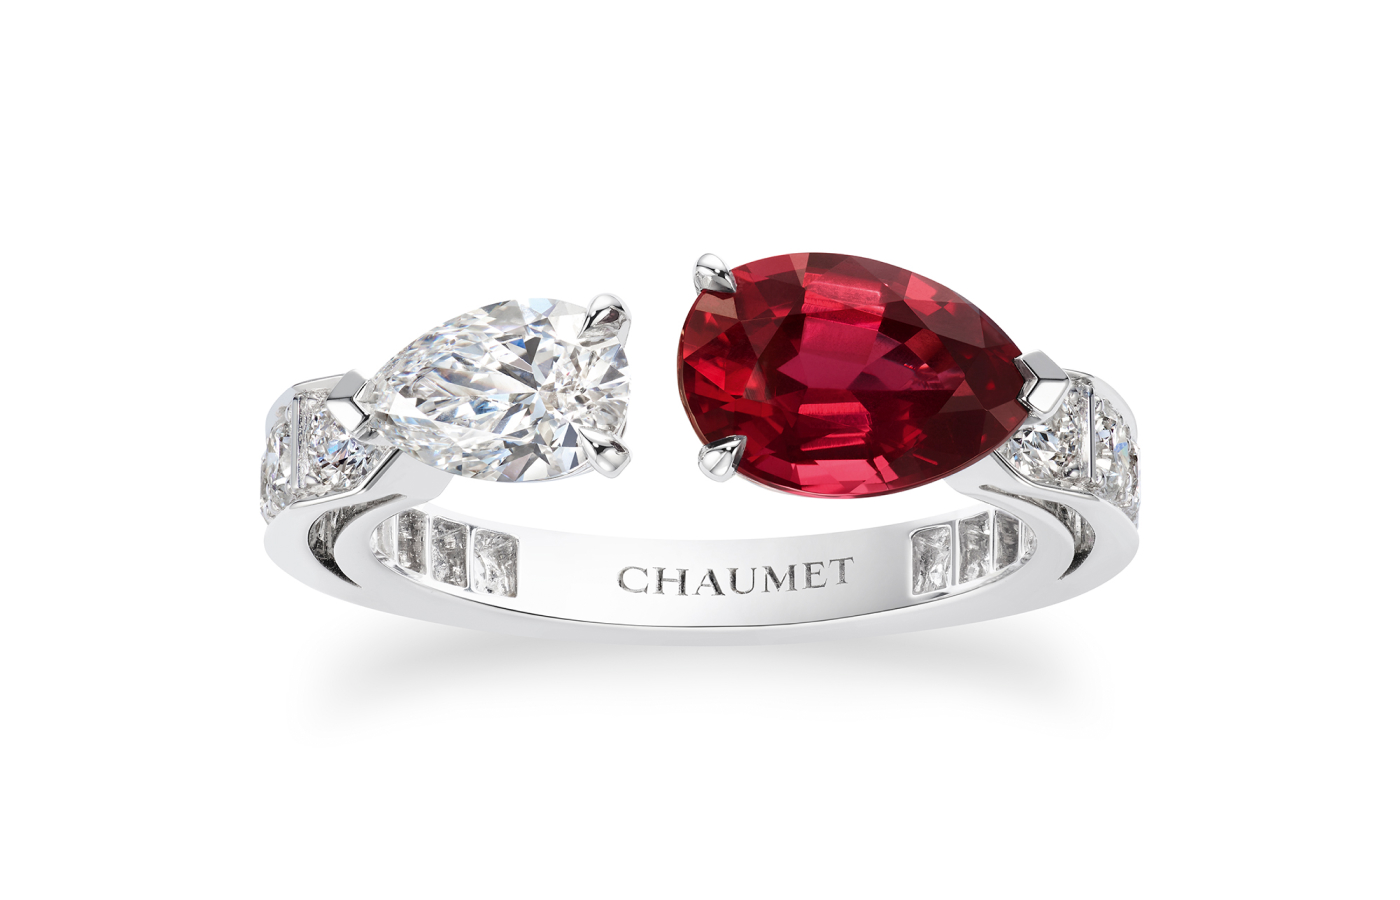 Chaumet Josephine Duo Eternel ring in white gold, ruby and diamond from the Josephine collection